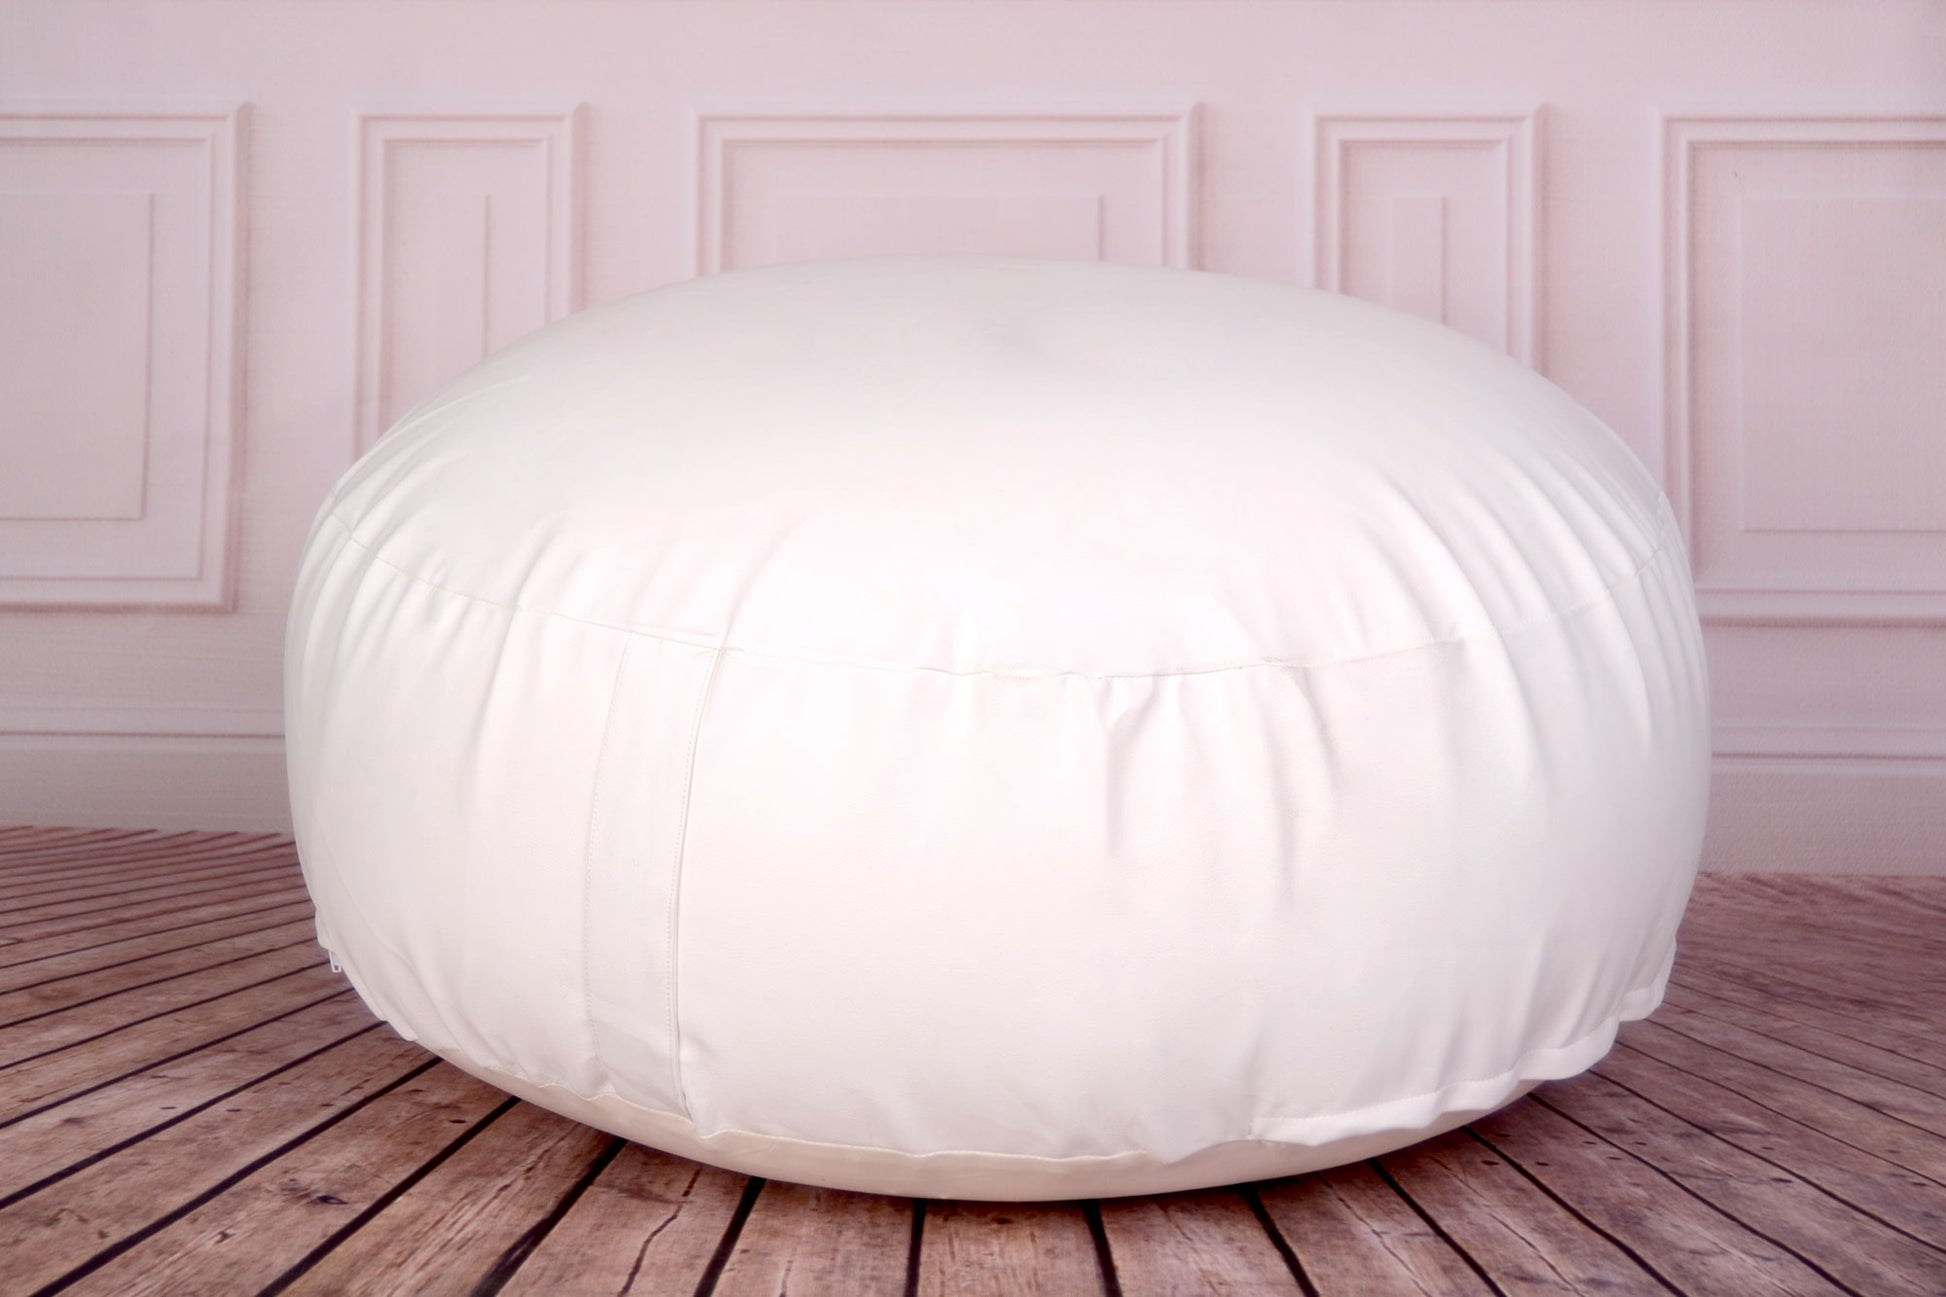 White newborn photography prop beanbag on a wooden floor with elegant wall paneling.